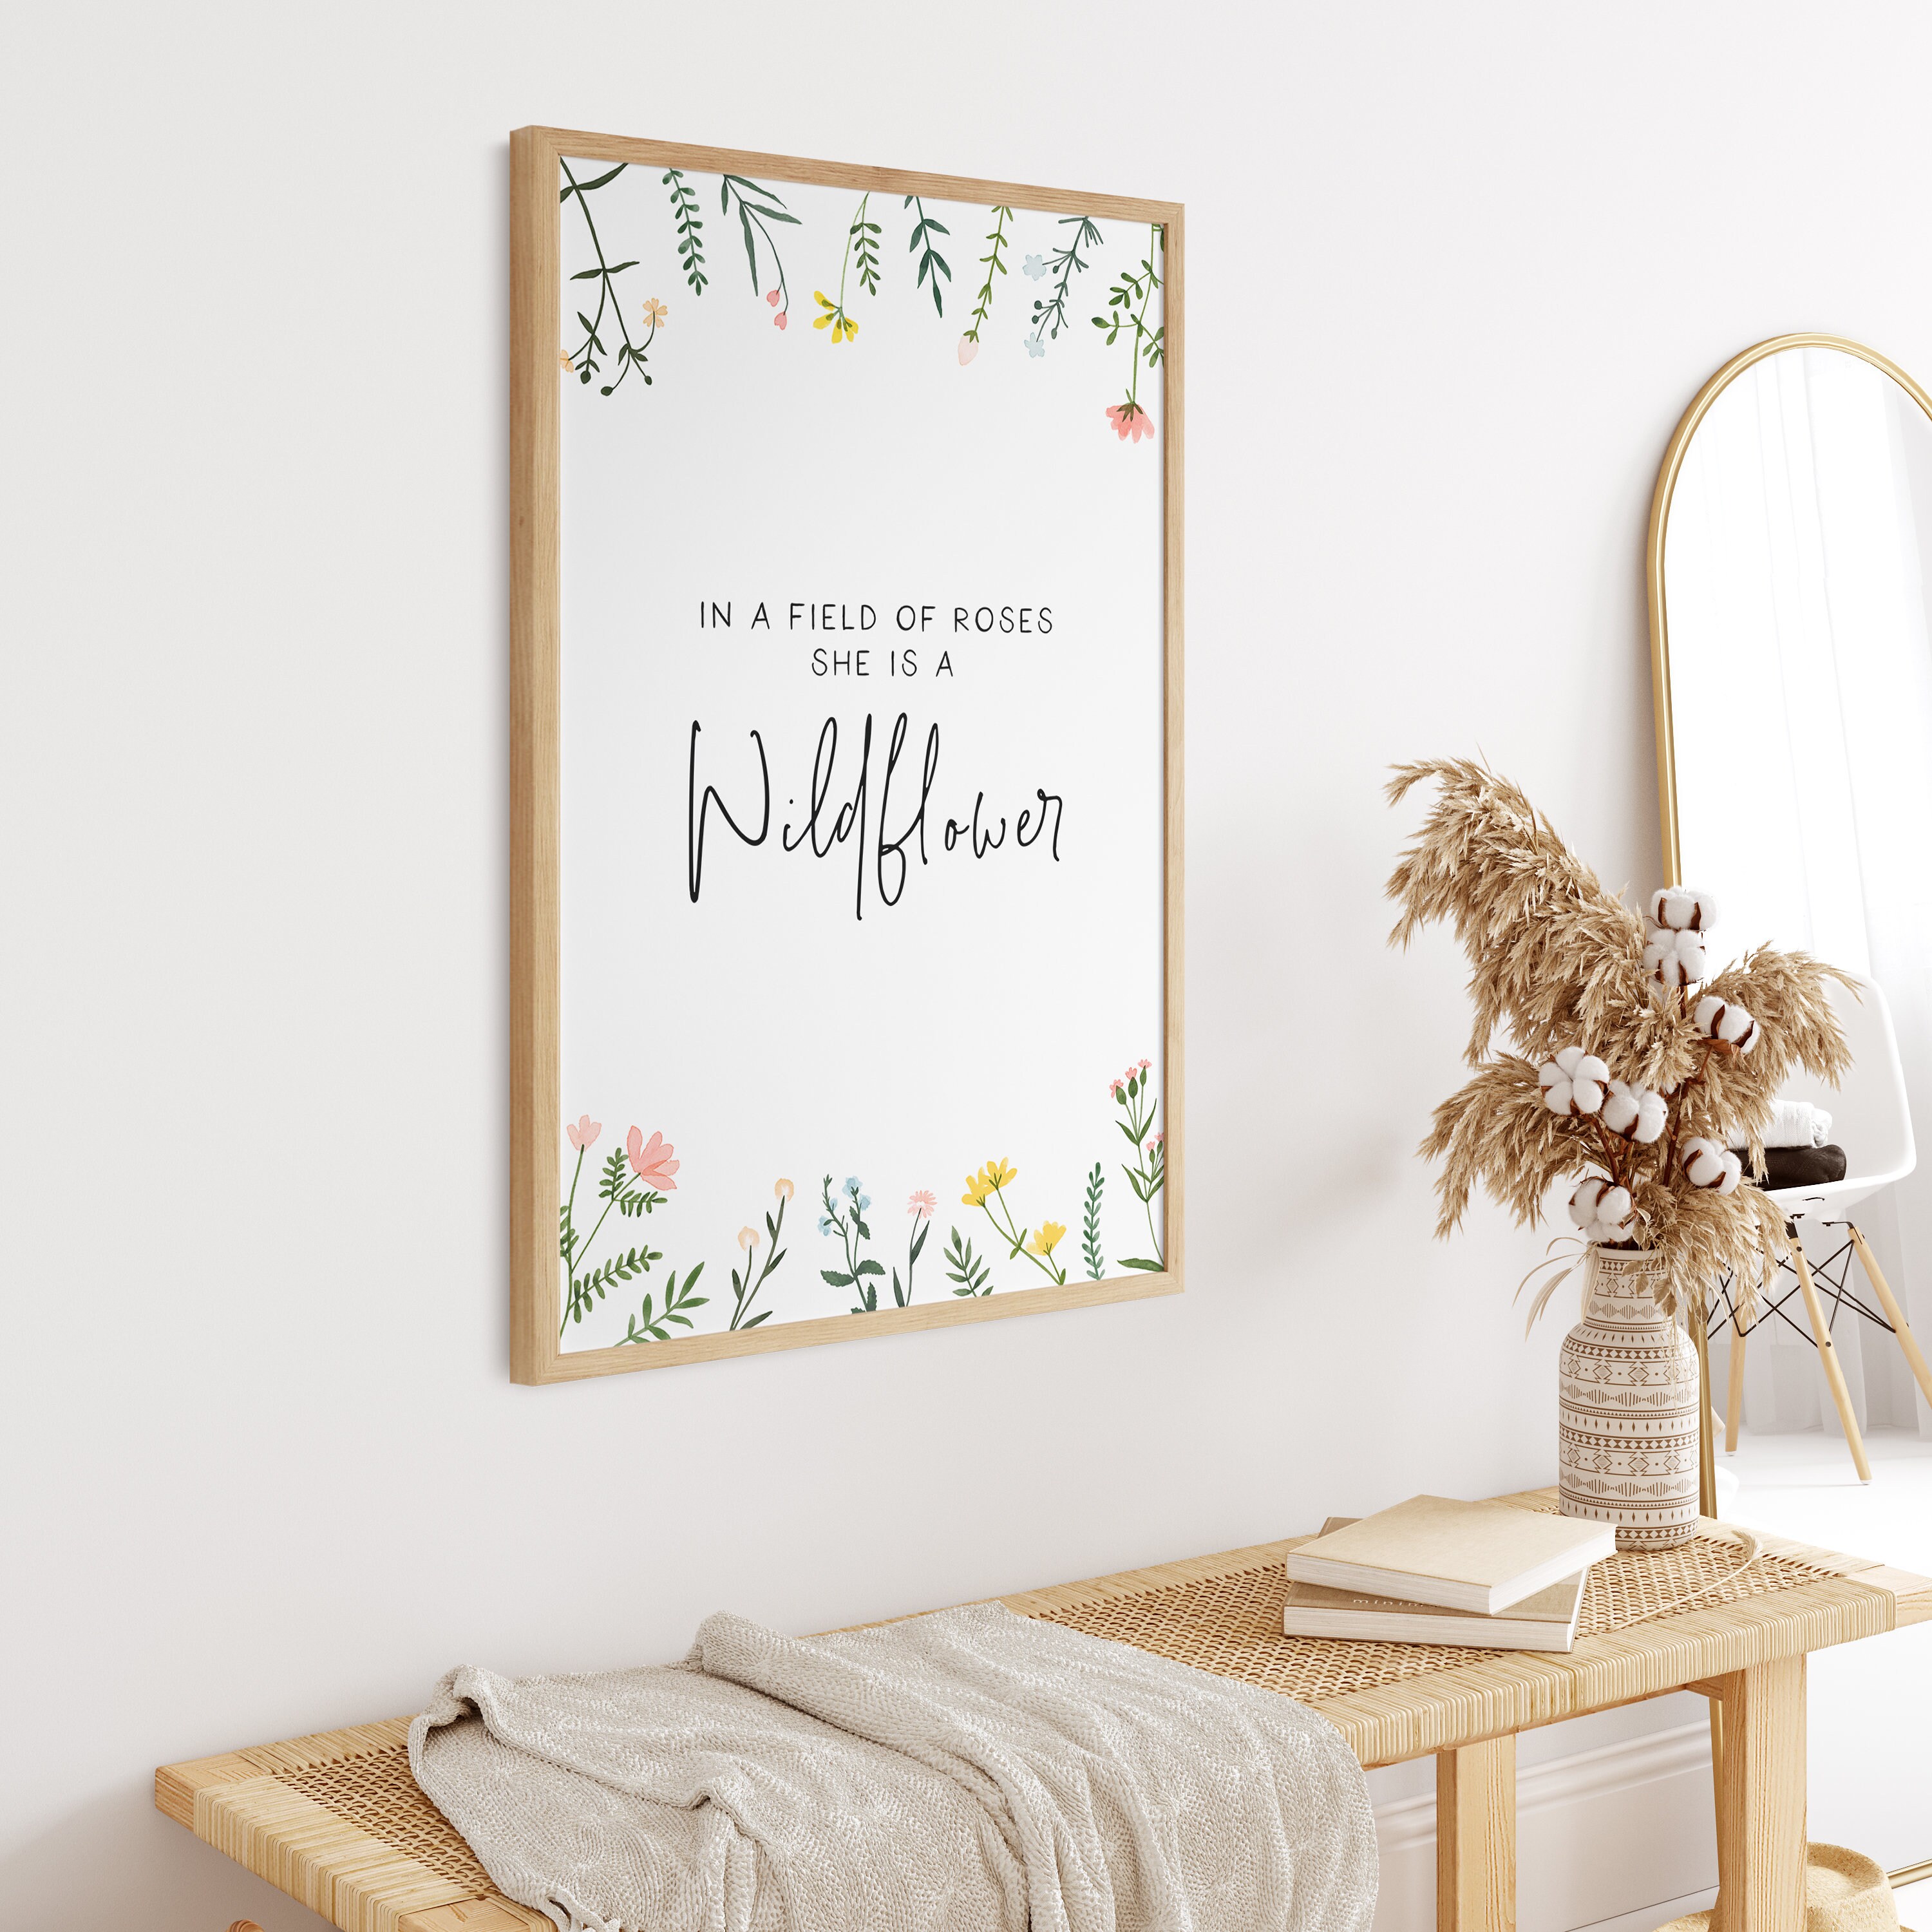 In a field of roses she is a wildflower Nursery Girl Quote Art Print  Minimalist Poster Canvas Painting Baby Kids Room Home Decor - AliExpress